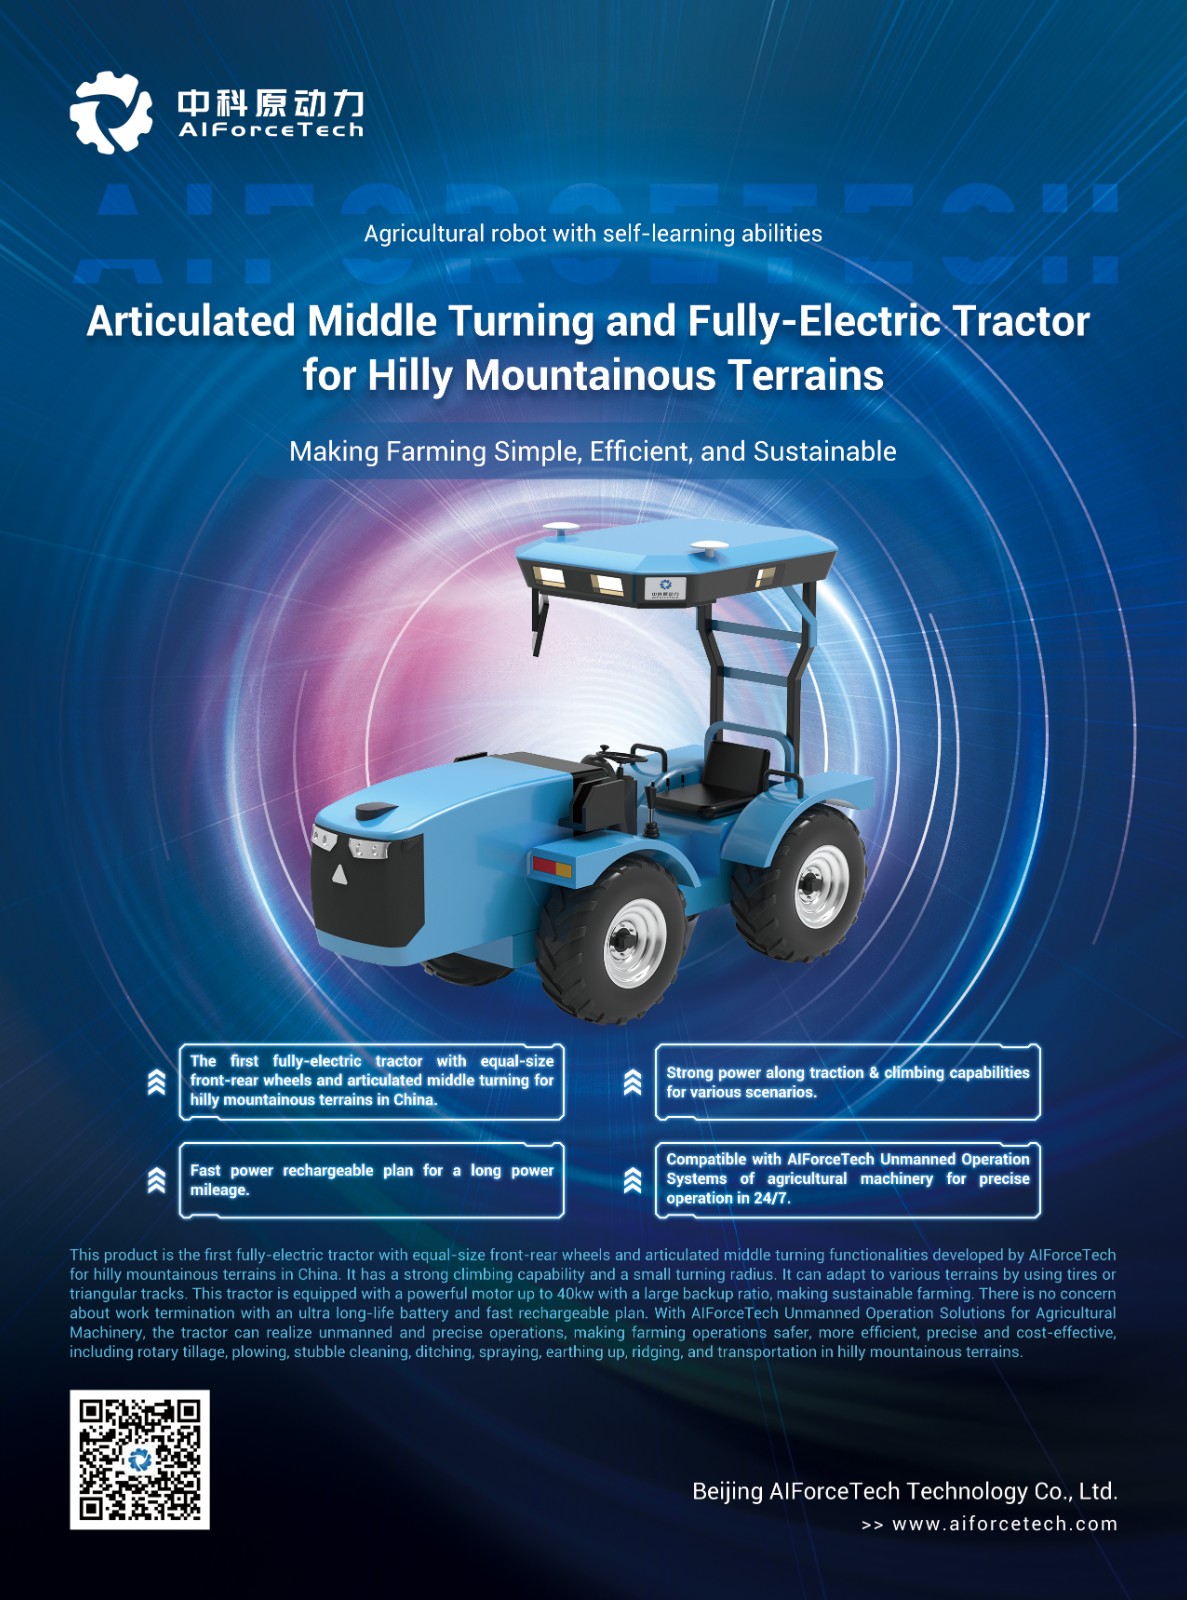 Articulated Middle Turning and Fully-Electric Tractor for Hilly Mountainous Terrains